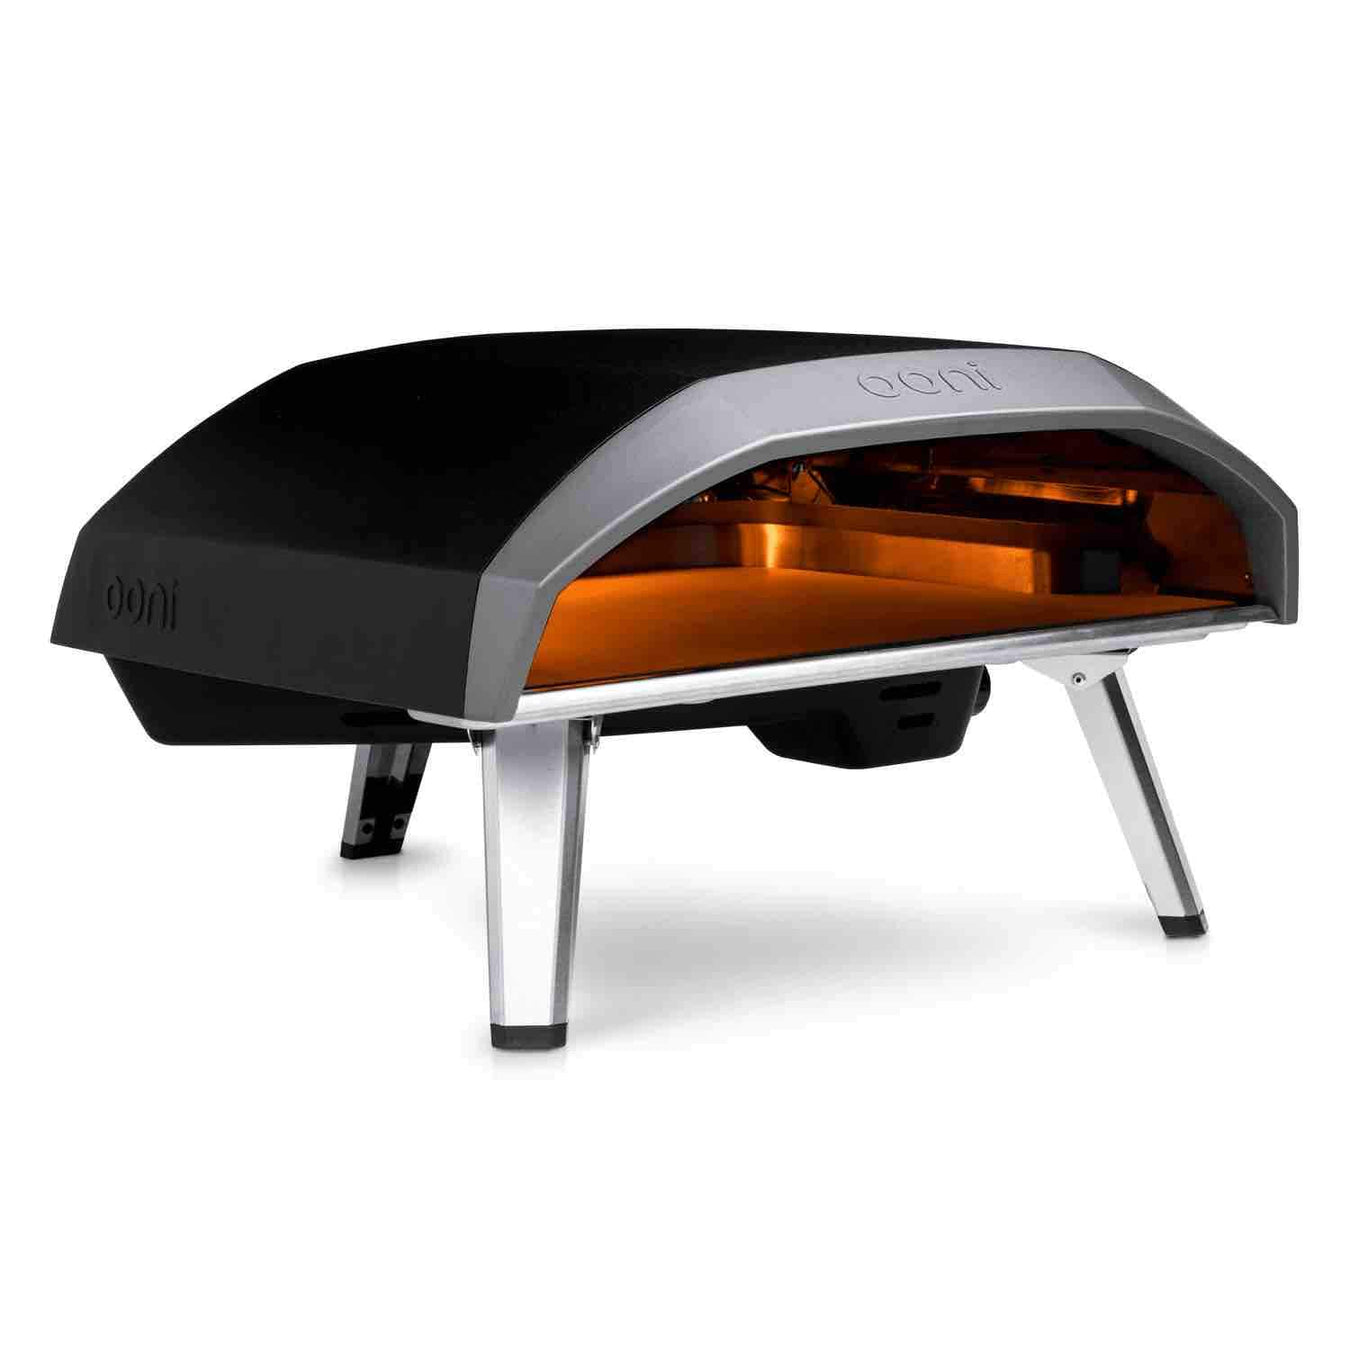 All you need with Ooni Koda 16 Gas Powered Pizza Oven